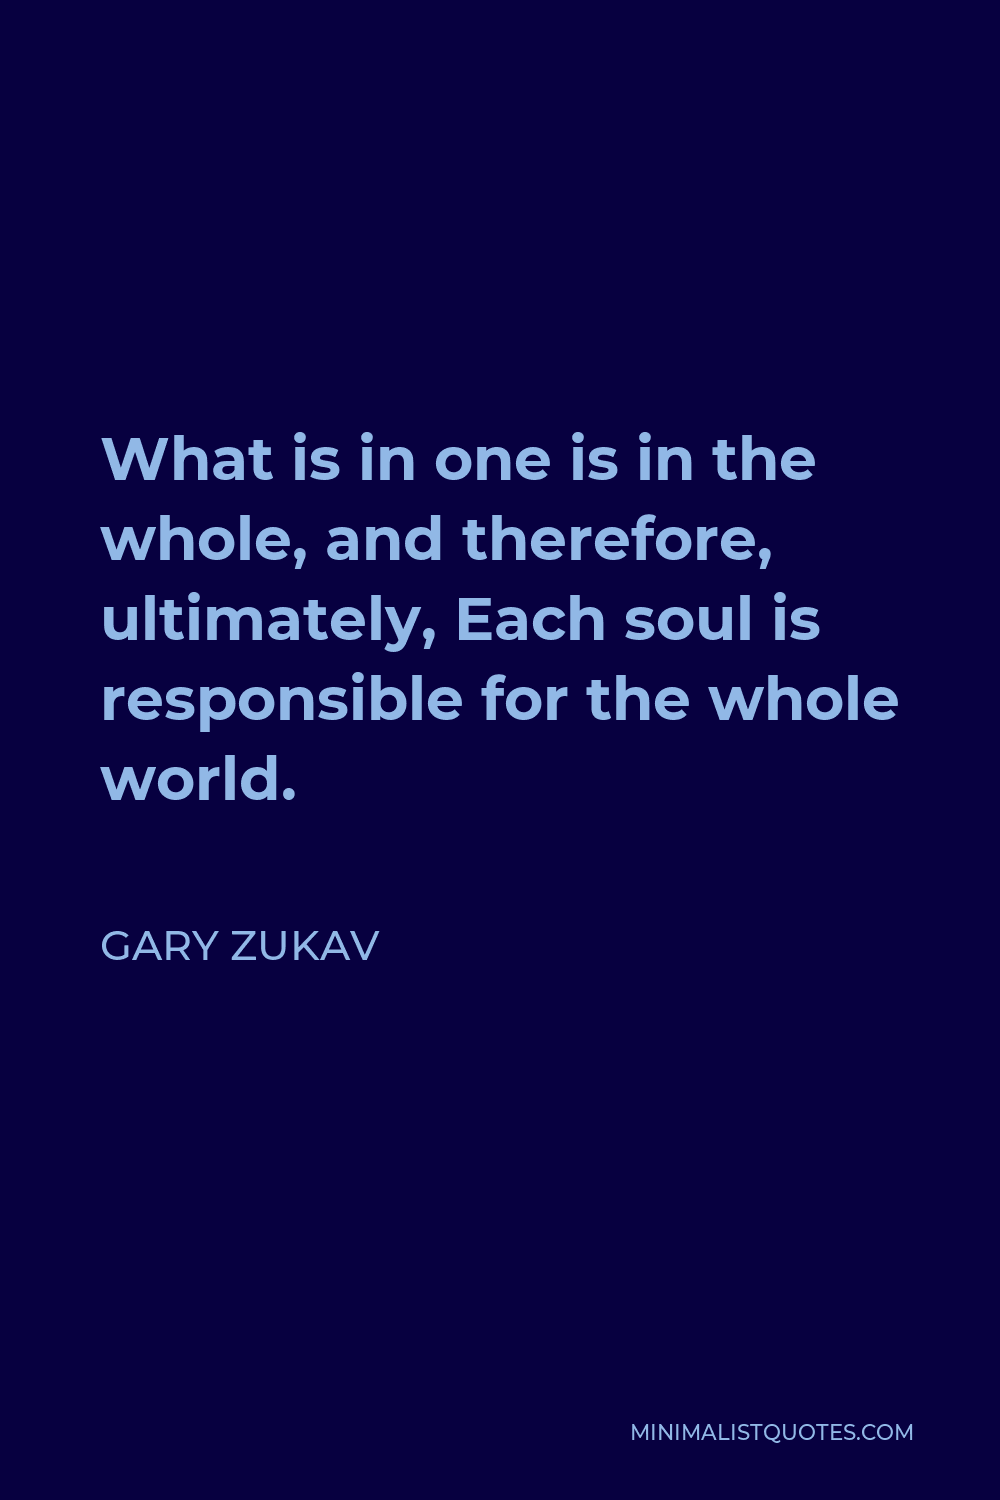 Gary Zukav Quote - What is in one is in the whole, and therefore, ultimately, Each soul is responsible for the whole world.